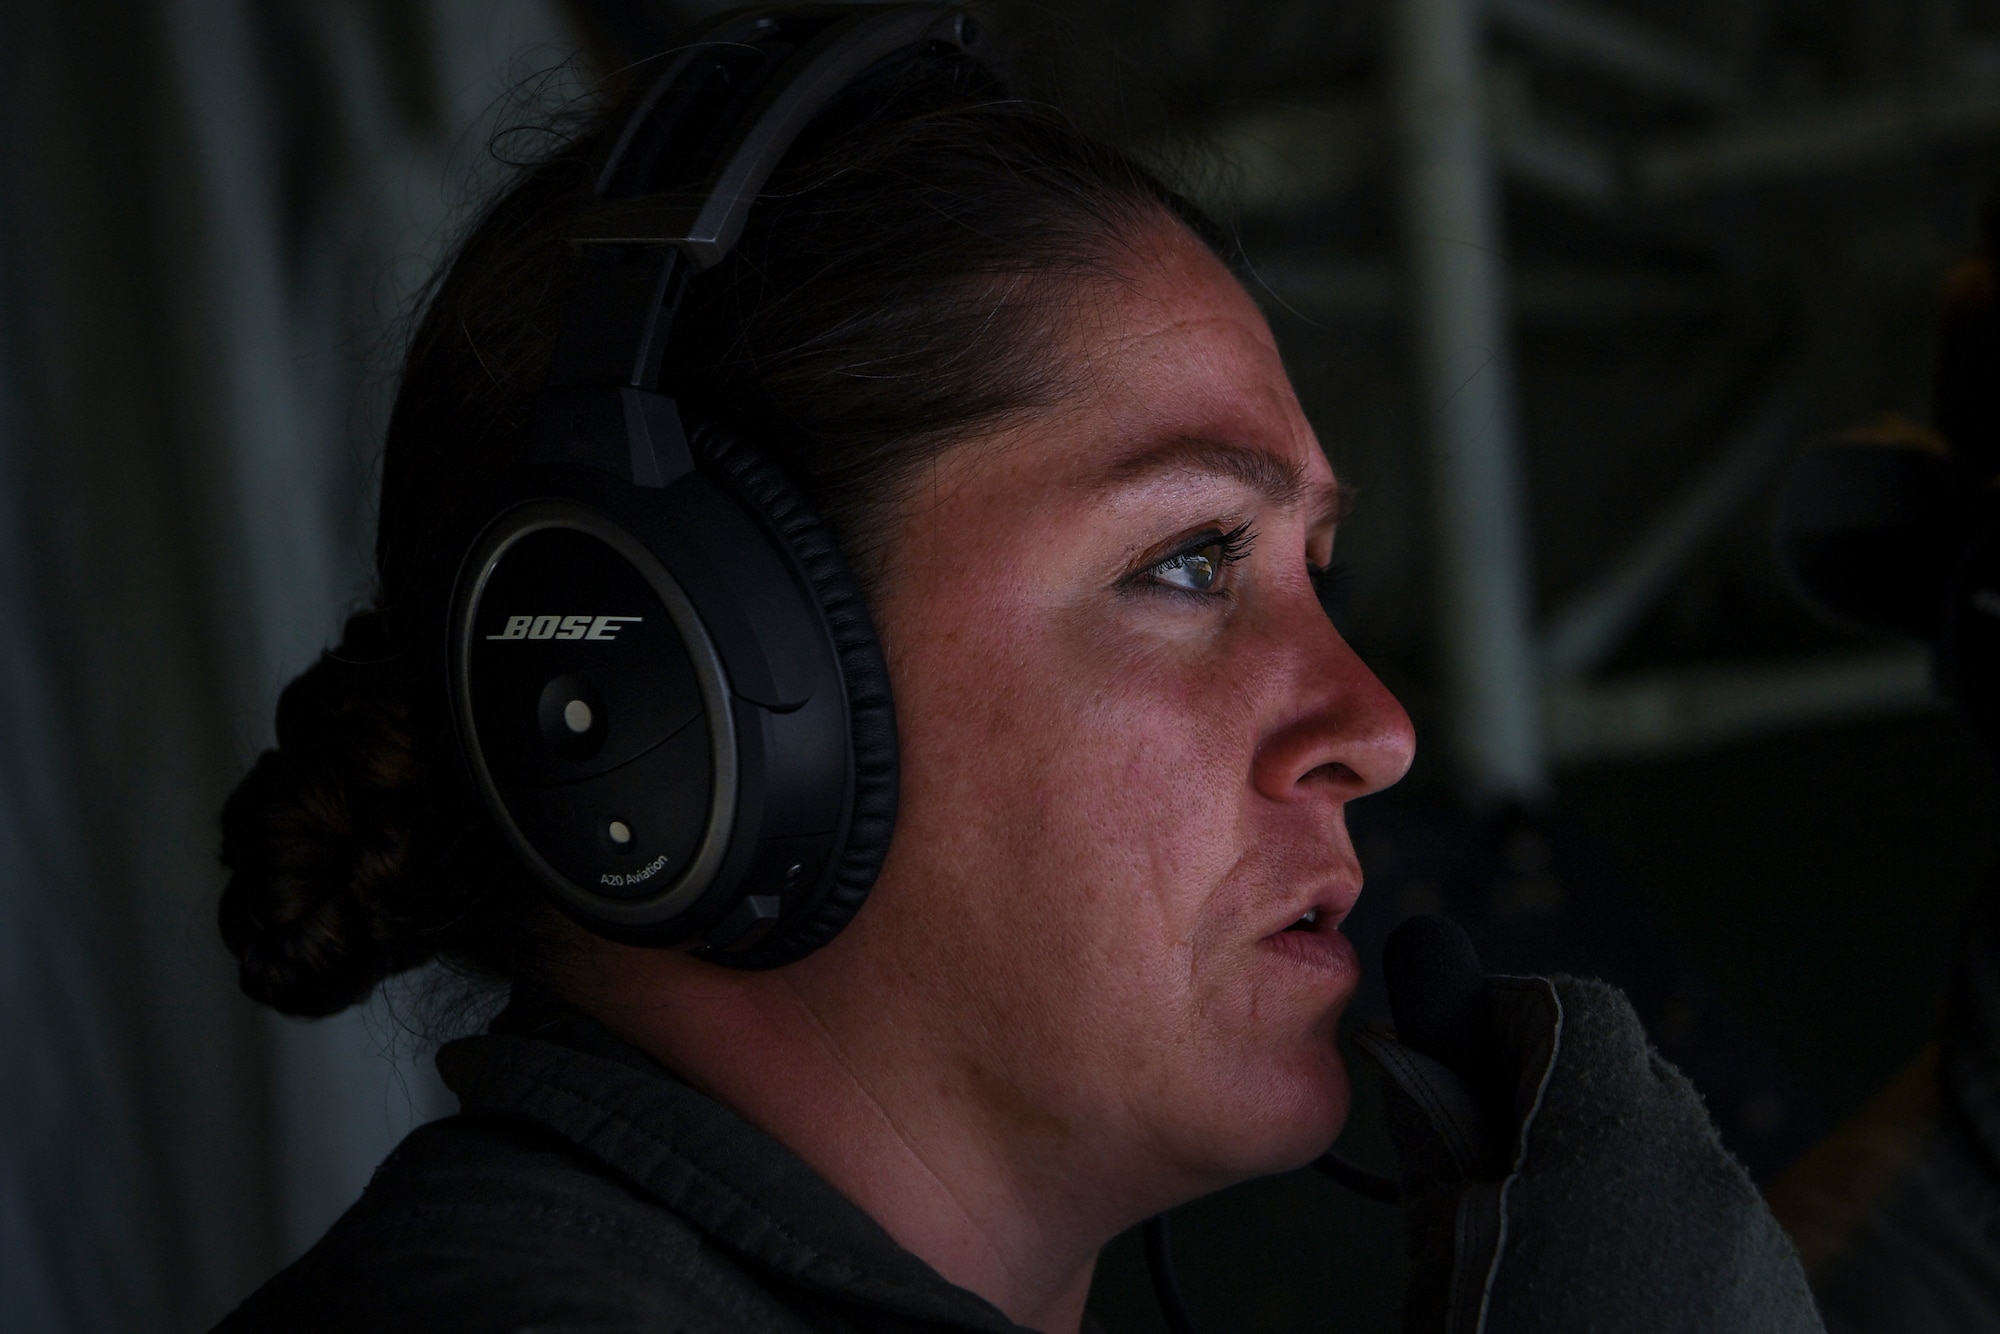 U.S. Air Force Major Catherine Paterson, 439th Aeromedical Evacuation Squadron medical crew director, talks on a communication system during an aeromedical mission at Tinian, U.S. Commonwealth of the Northern Mariana Islands, during exercise COPE NORTH 18, Feb. 19.